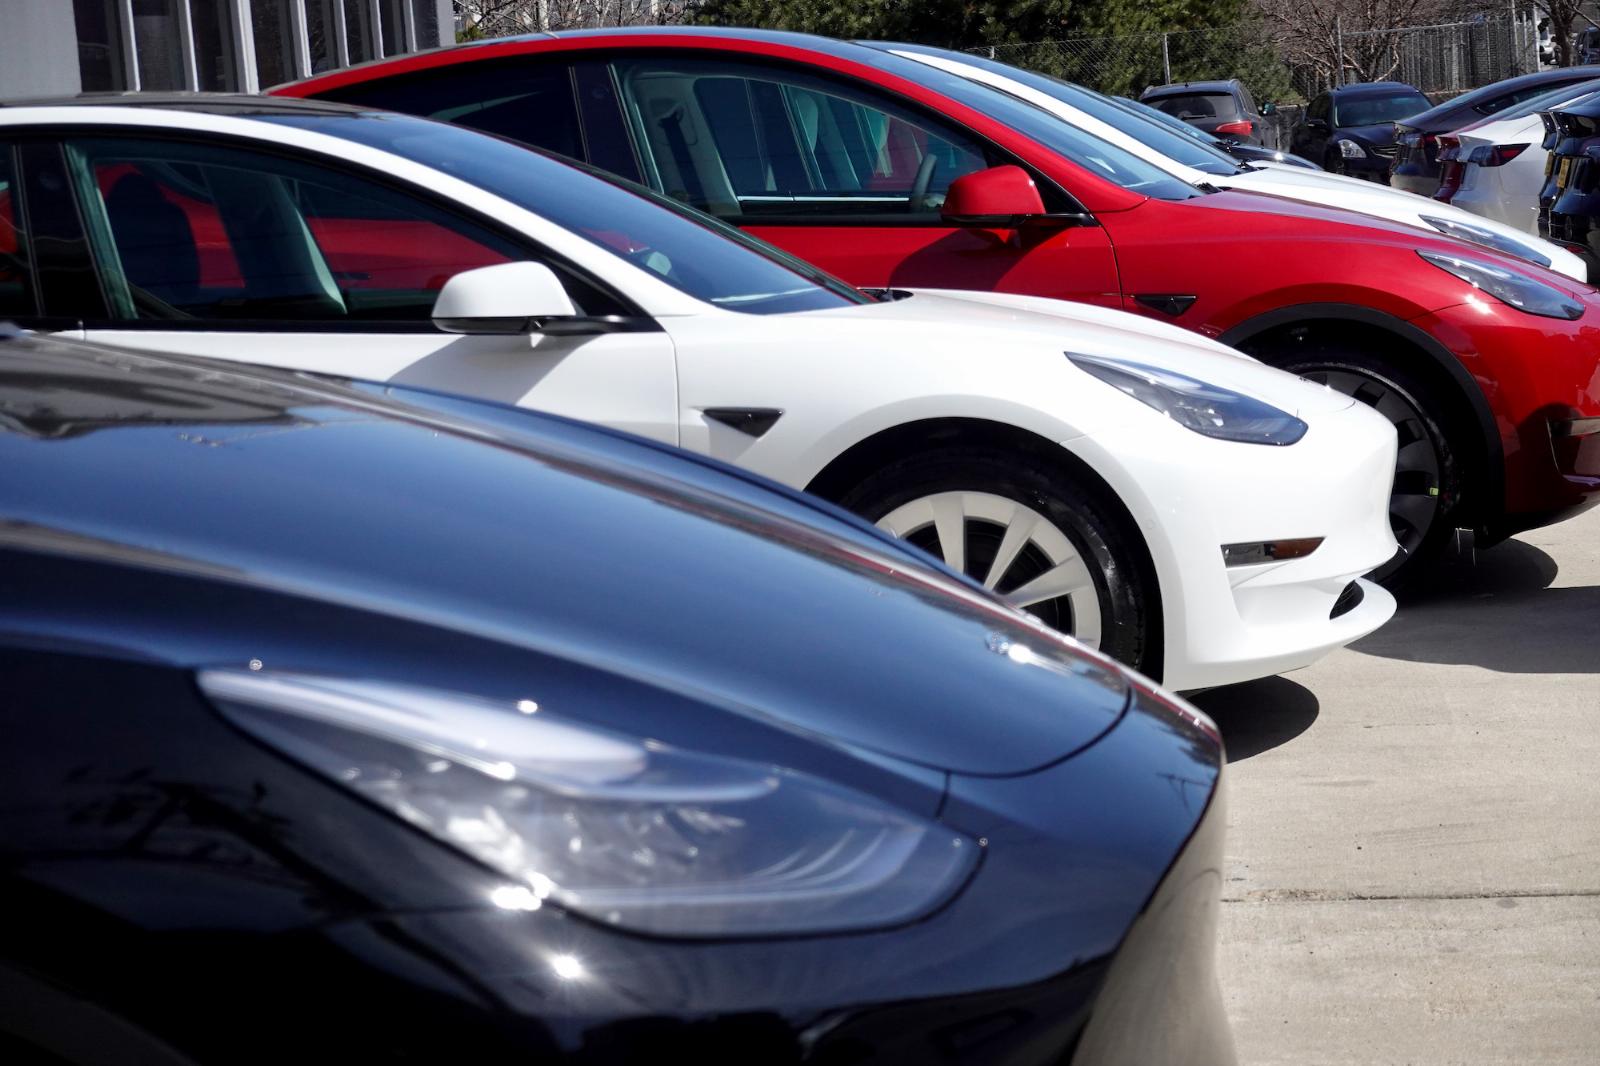 Amber launches Tesla warranty service to help owners of aging EVs